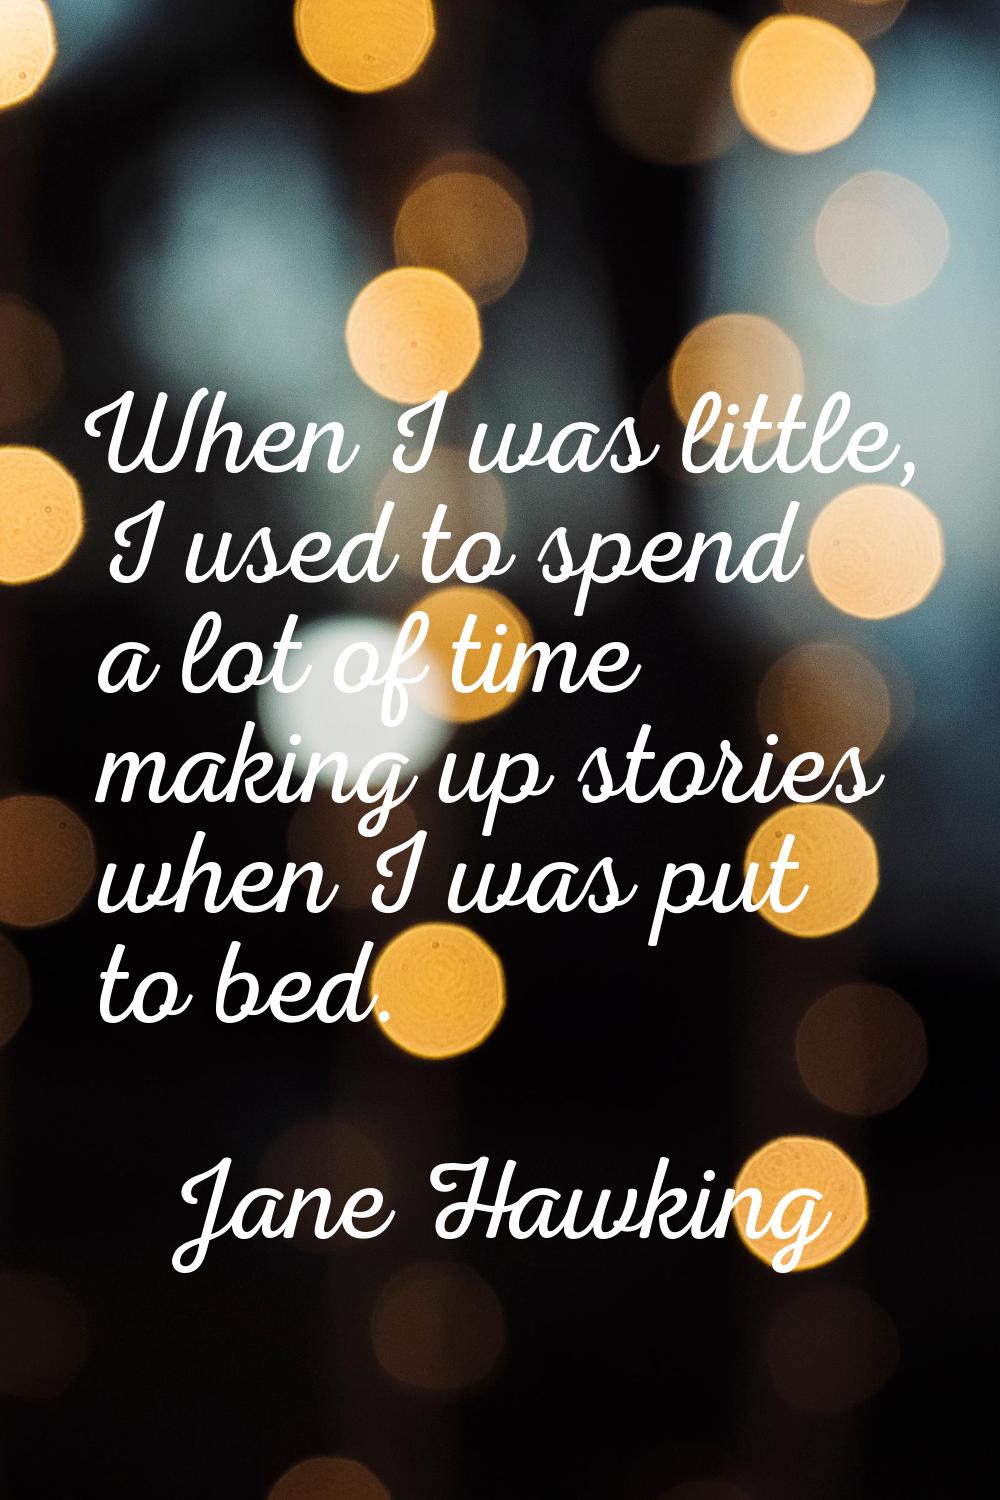 When I was little, I used to spend a lot of time making up stories when I was put to bed.